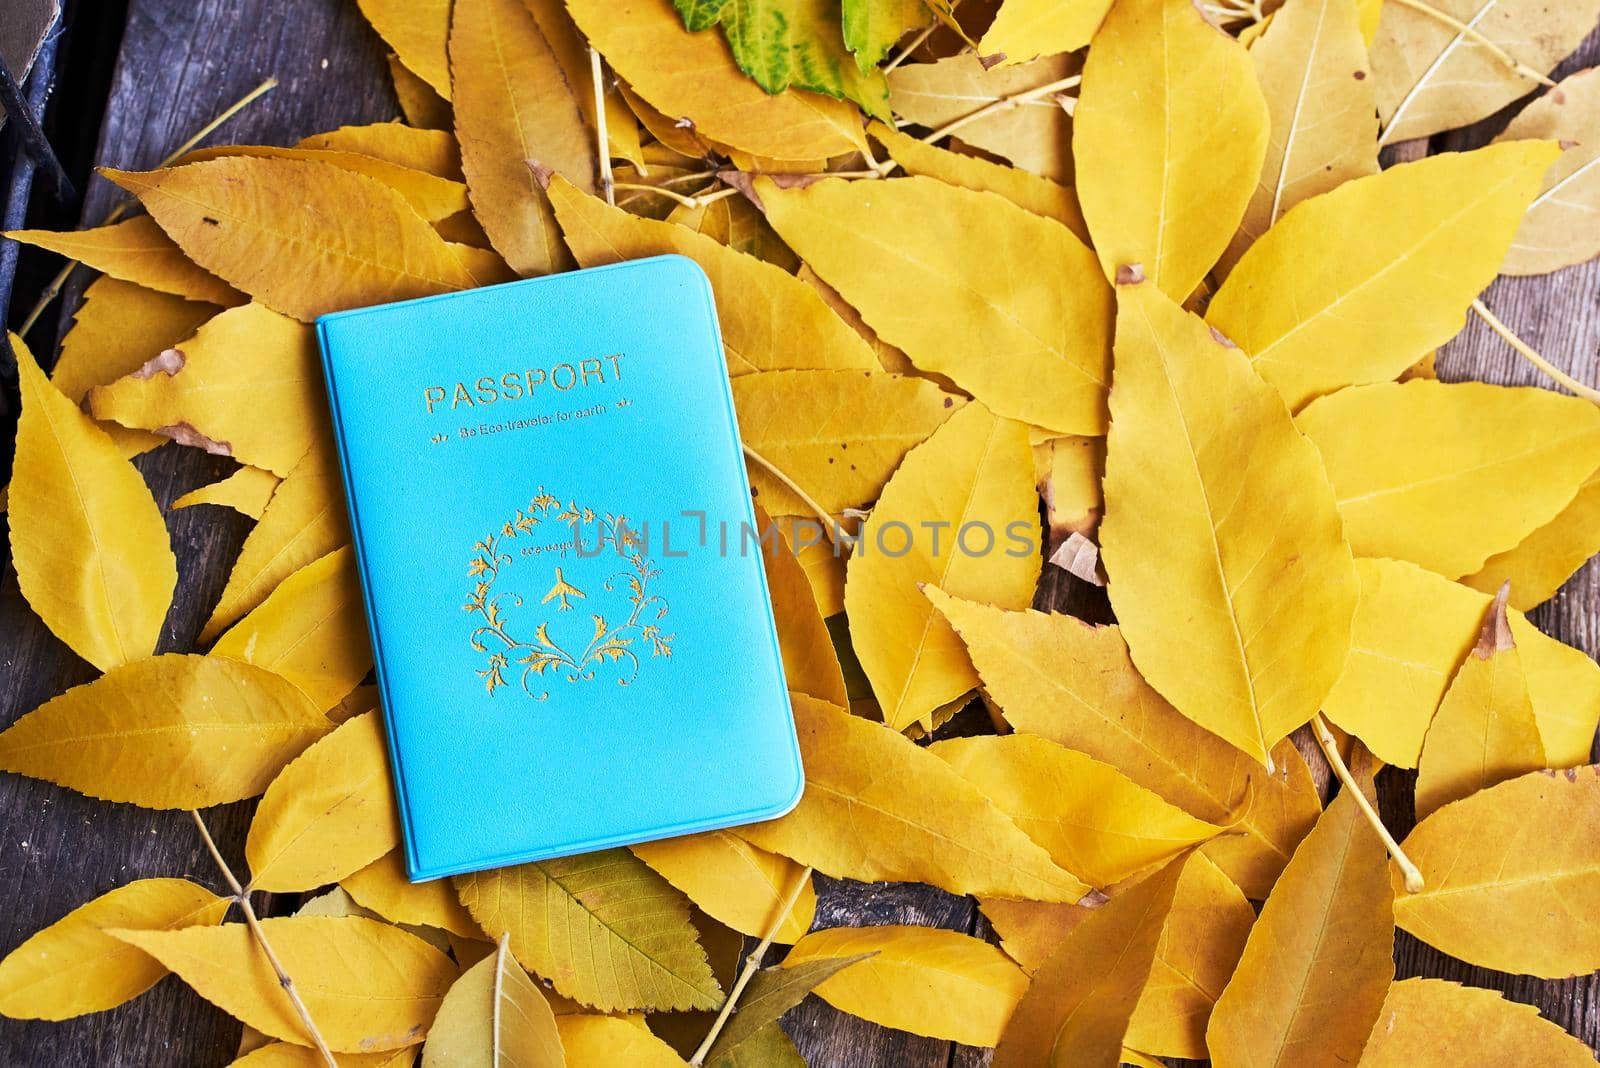 Passport in blue cover lies on wooden bench with many yellow autumn leaves